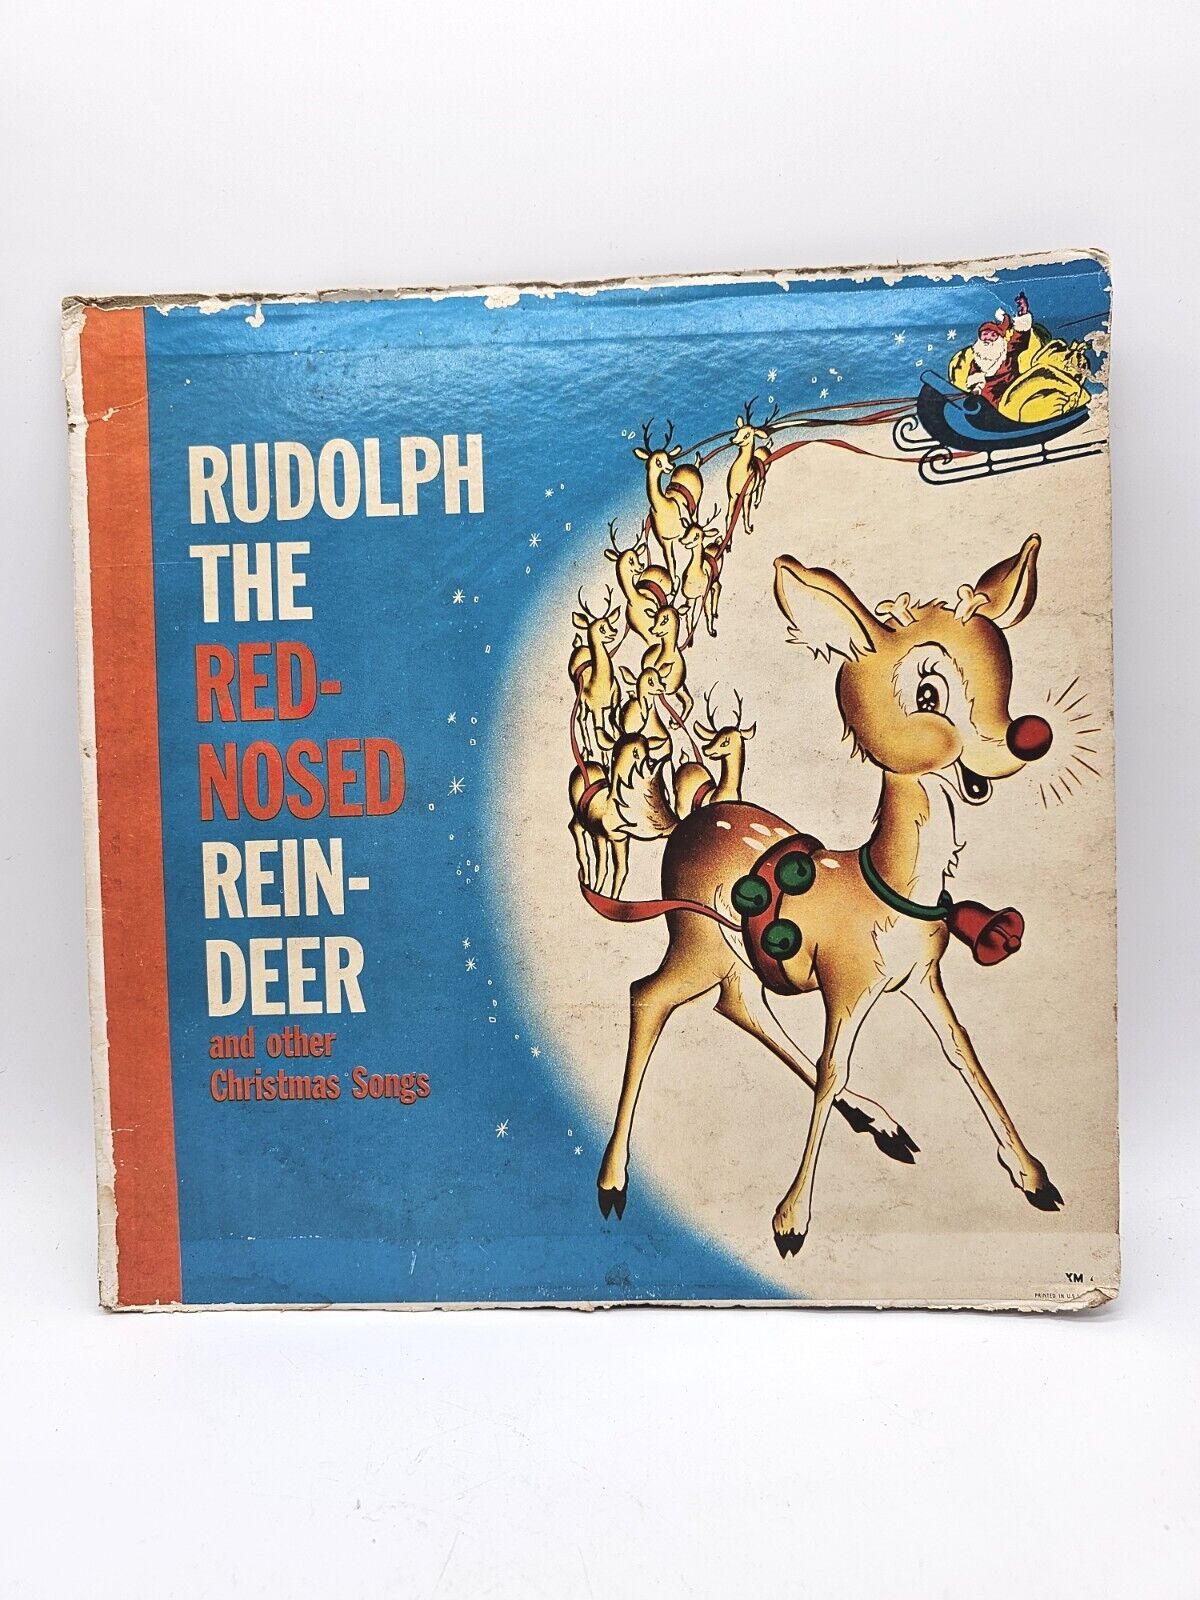 Vintage Rudolph The Red Nosed Reindeer Christmas Album 1950/1960's? Tested